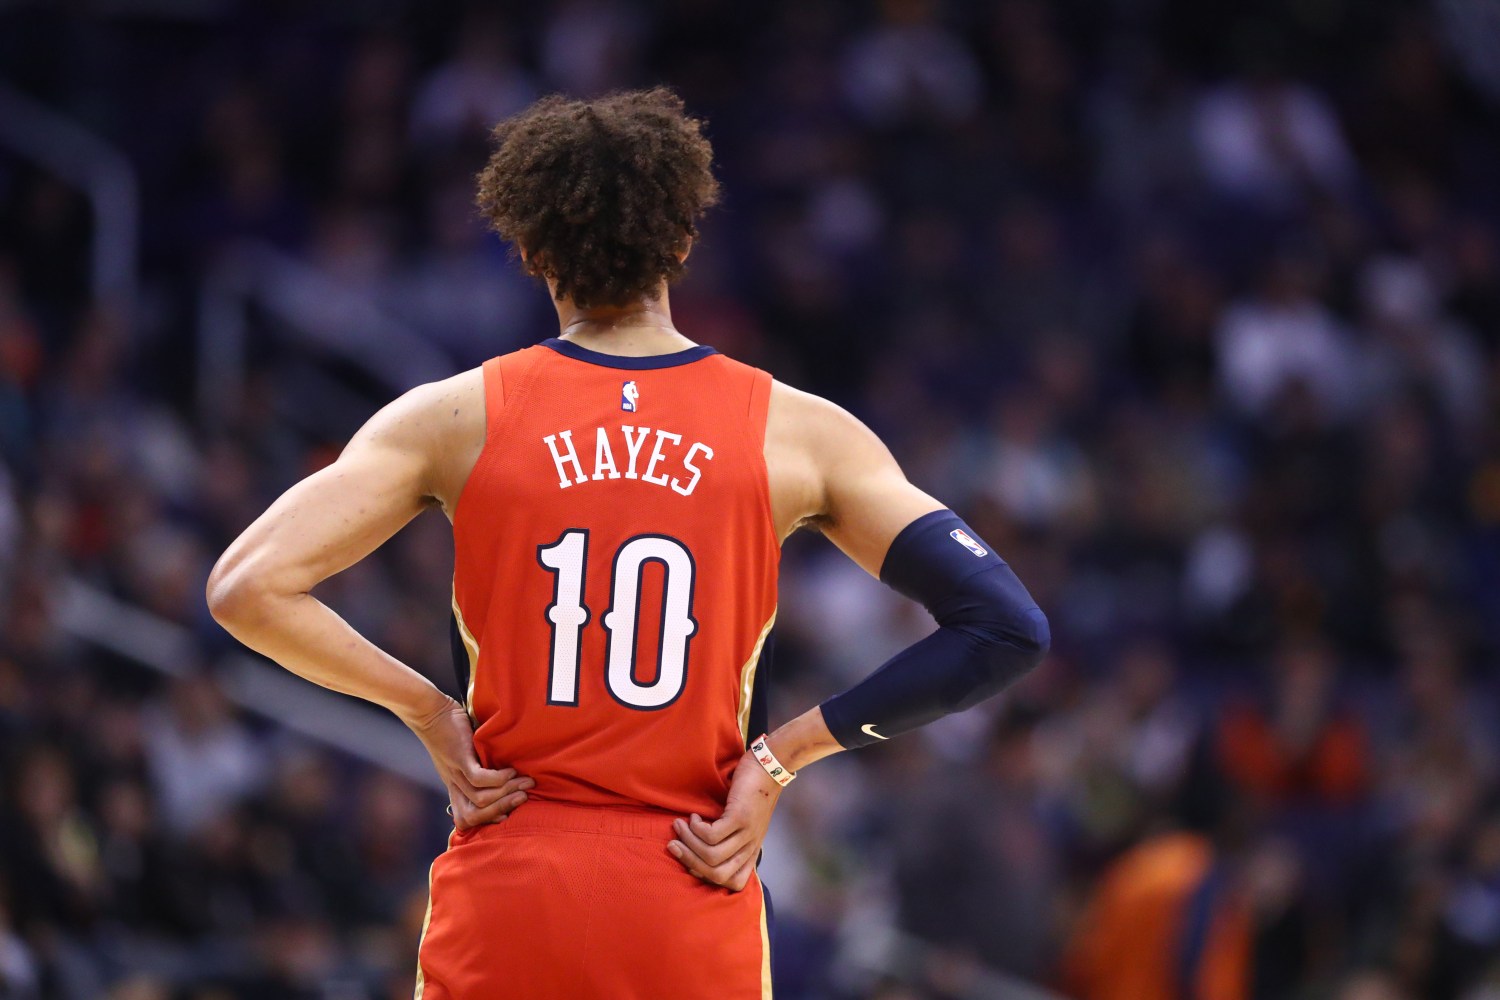 Nov 21, 2019; Phoenix, AZ, USA; Detailed view of the jersey of New Orleans Pelicans center Jaxson Hayes (10) against the Phoenix Suns at Talking Stick Resort Arena. Mandatory Credit: Mark J. Rebilas-USA TODAY Sports